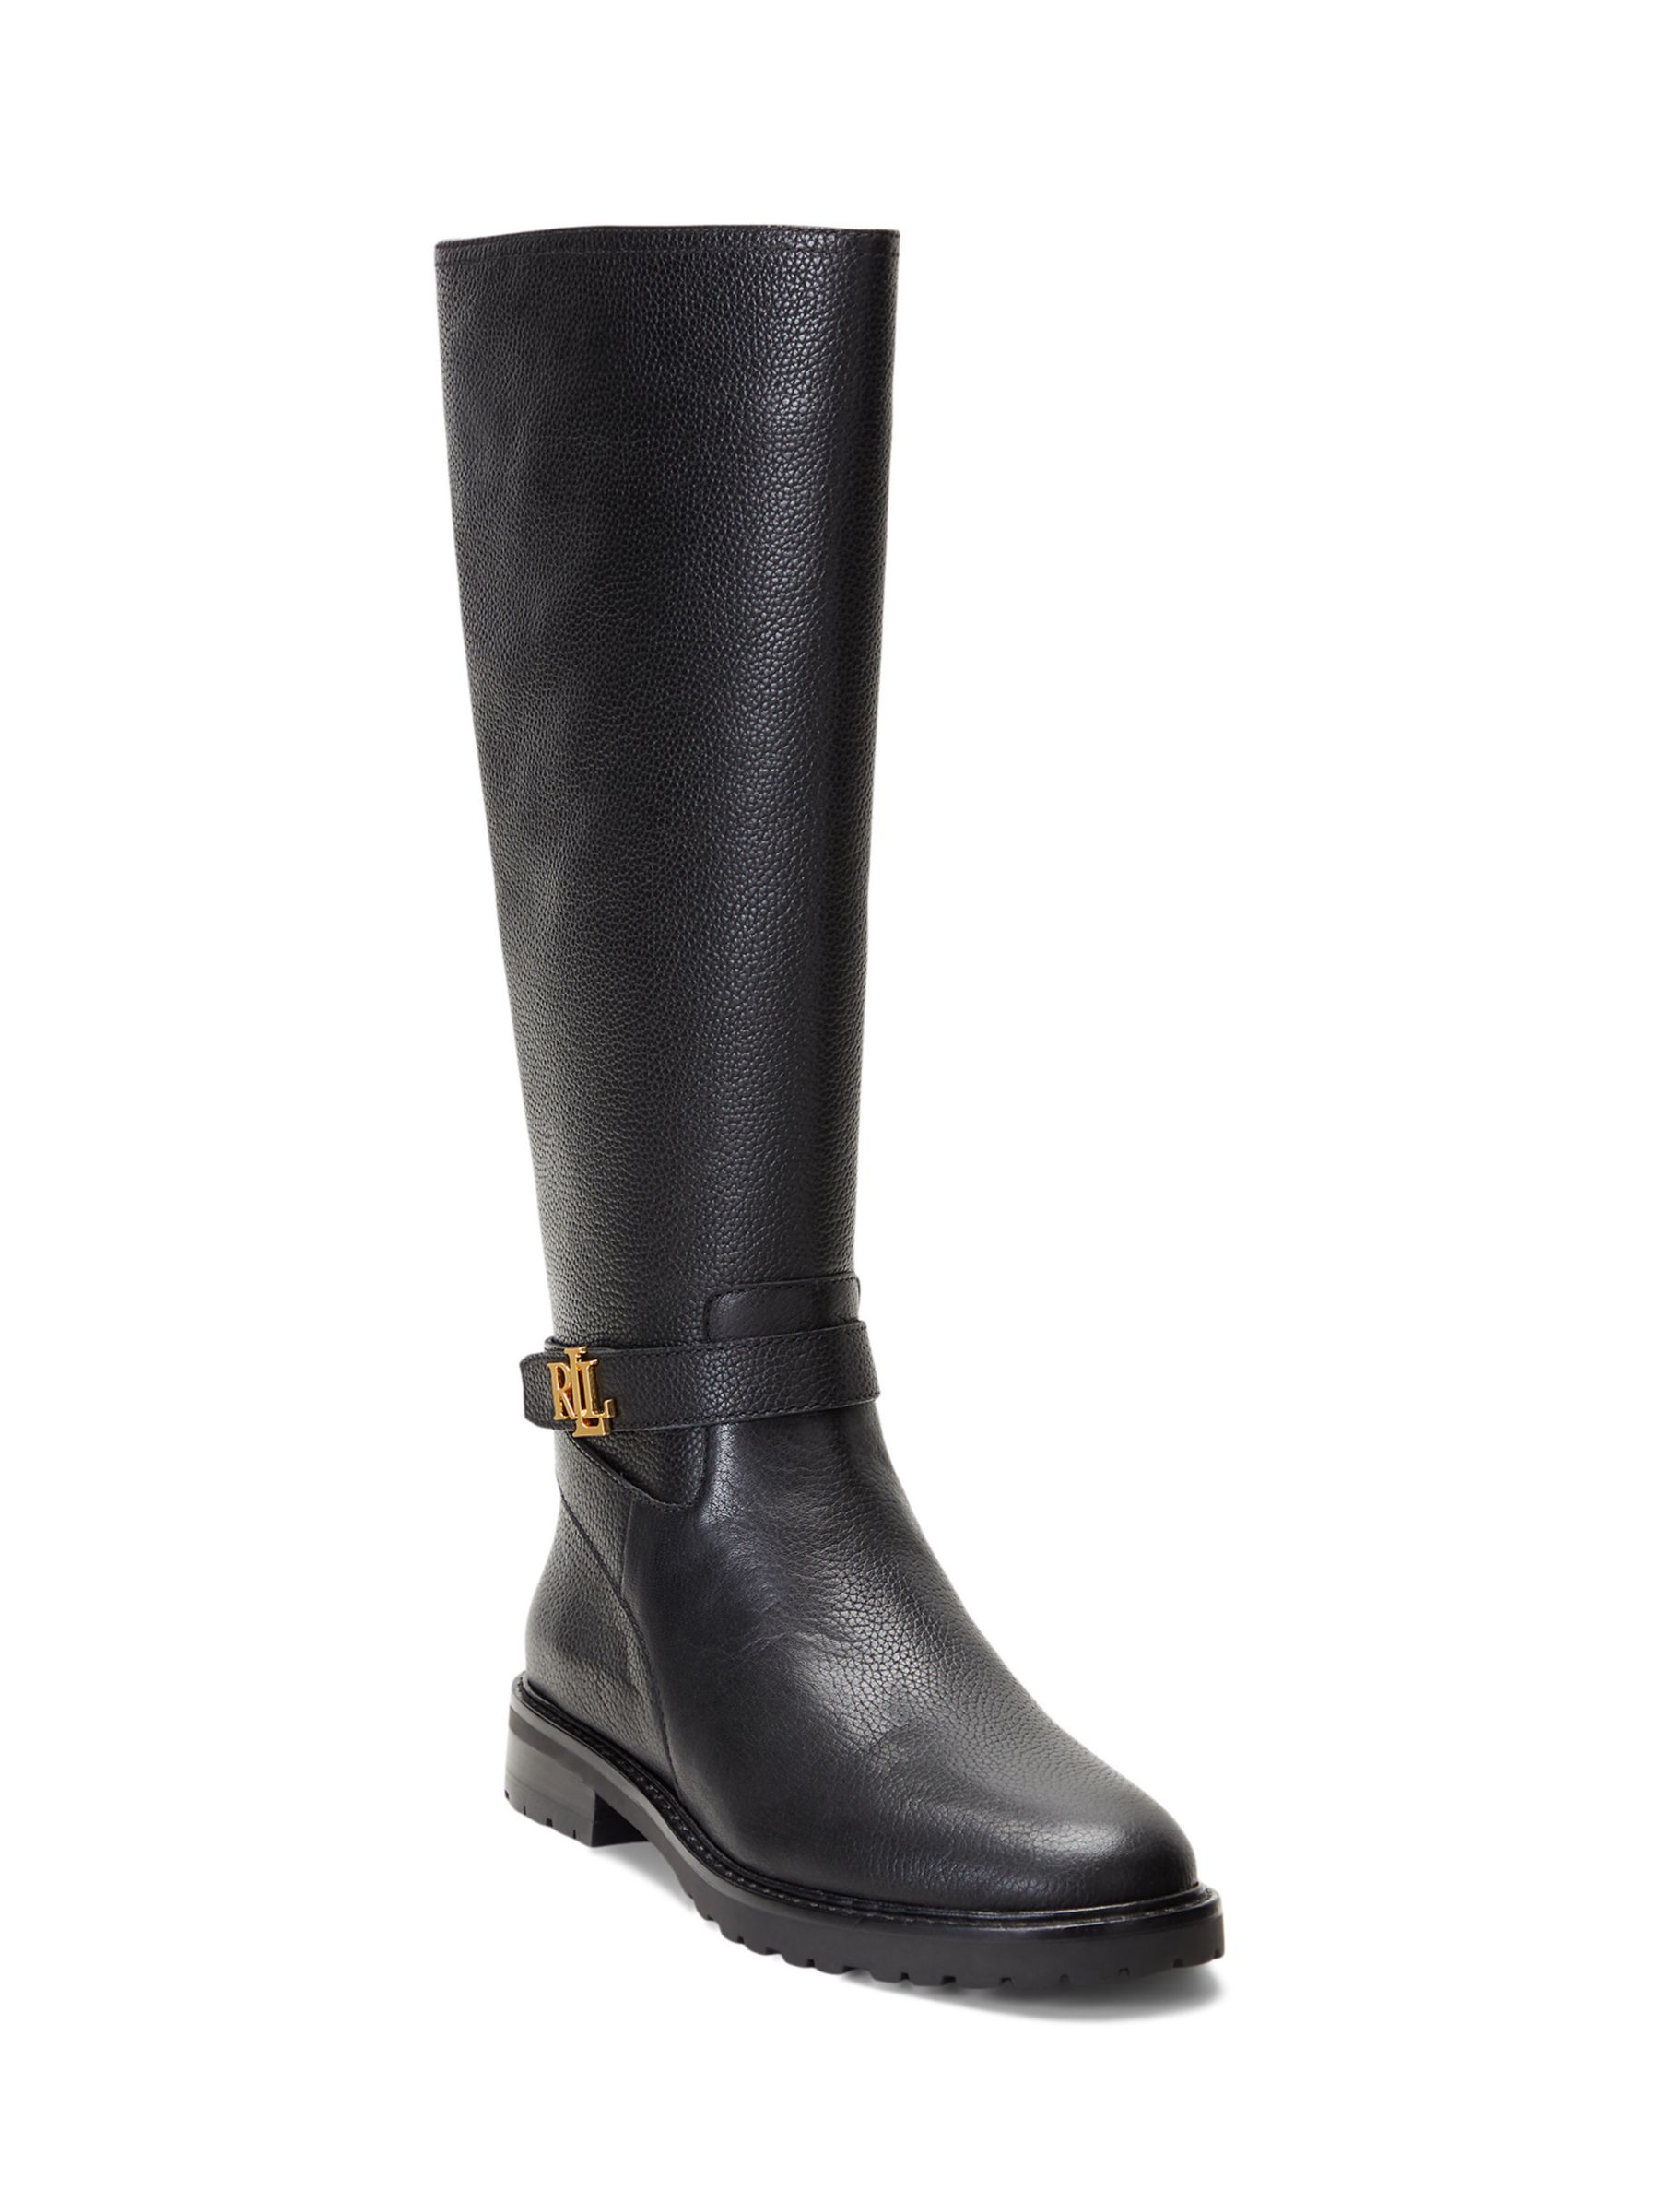 Ralph Lauren Hallee Iconic Riding Boots, Black at John Lewis & Partners